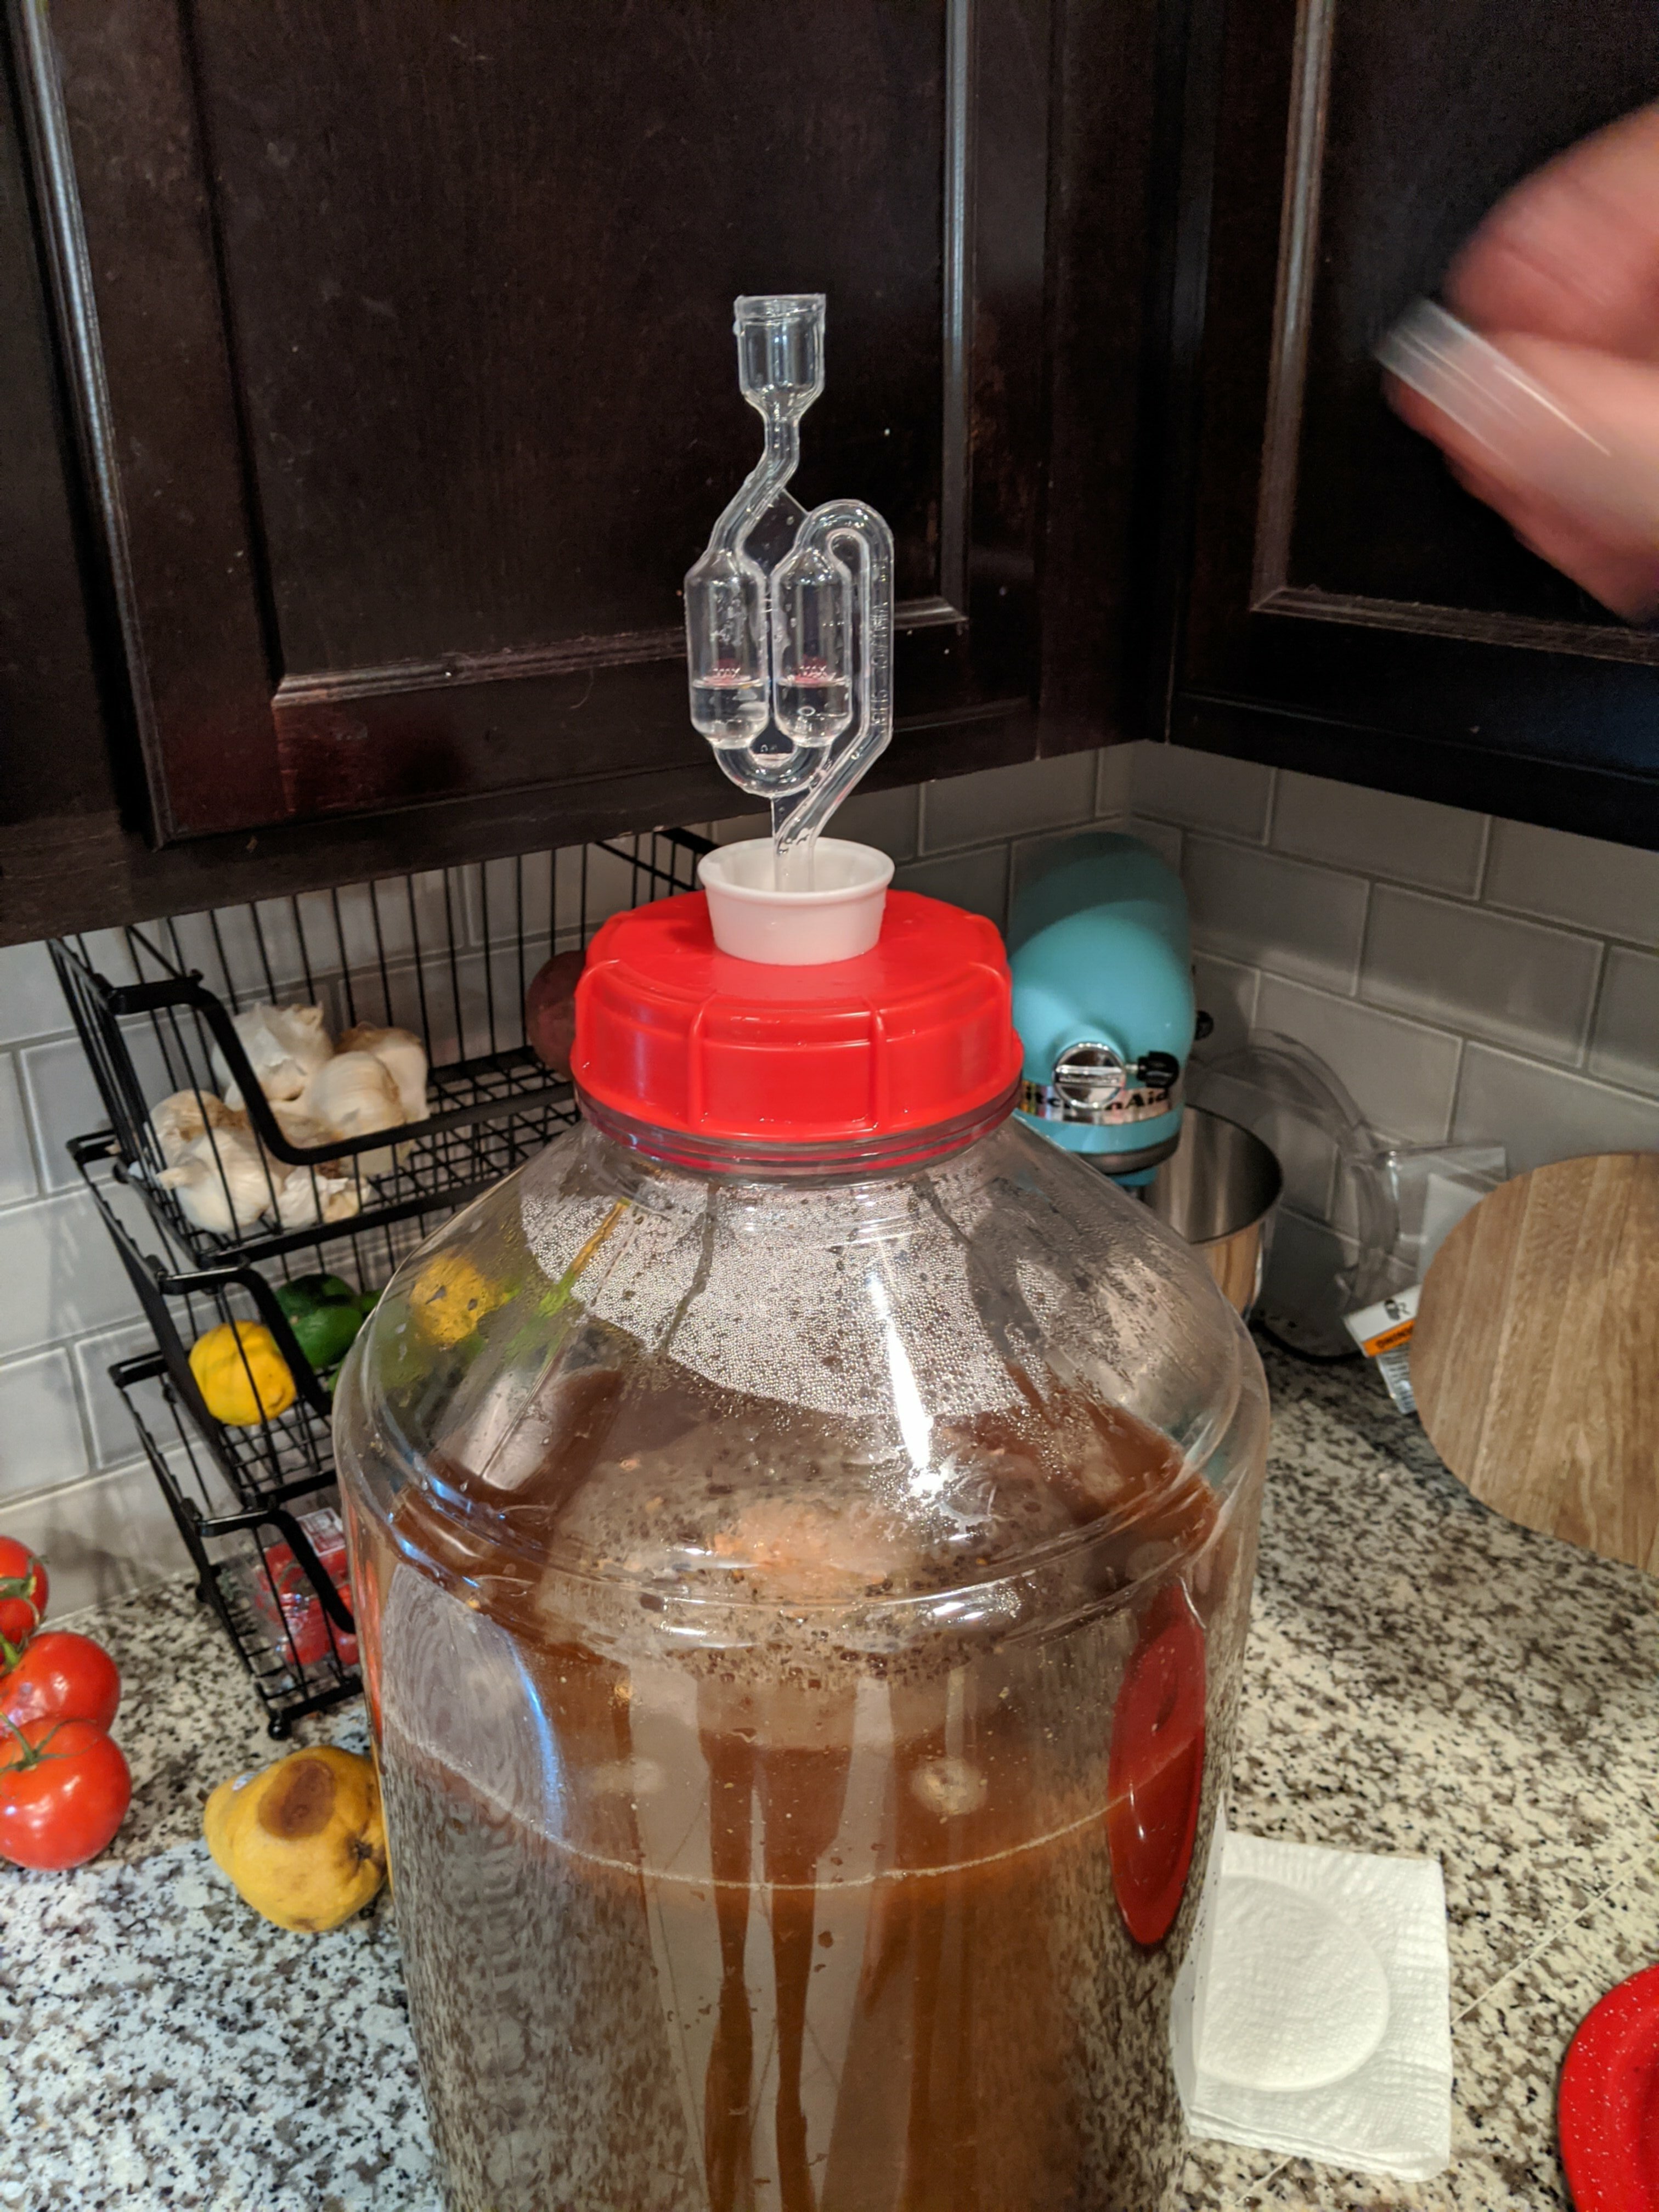 The beer right after the boil, sealed in the carboy and ready to begin fermenting. The cap has an airlock to allow gas to escape during fermentation.